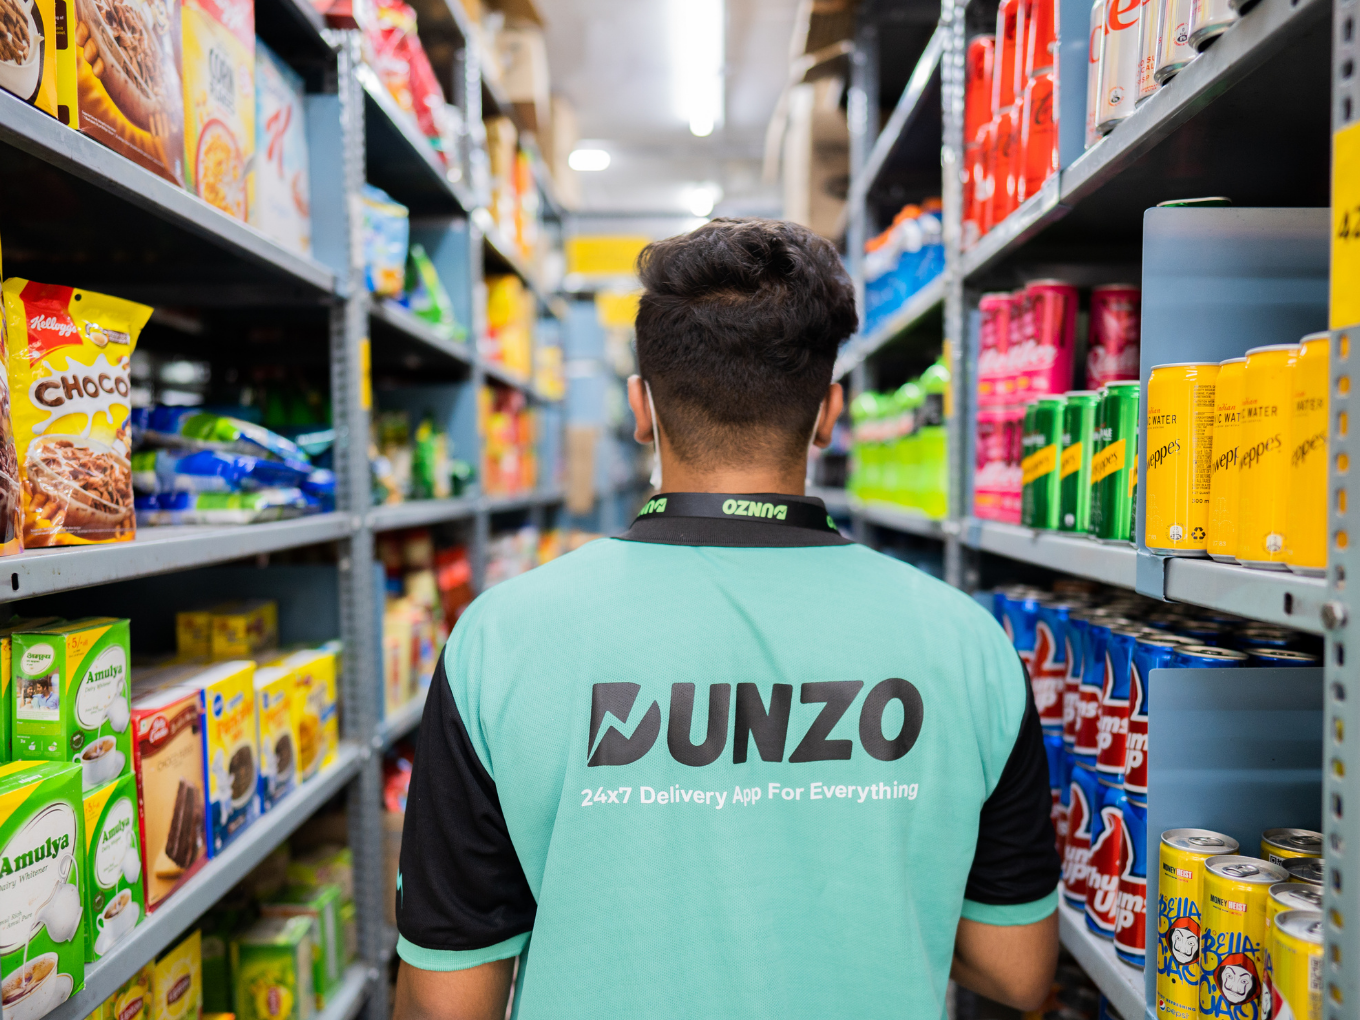 Dunzo’s B2B Logistics Arm Joins ONDC To Offer Last-Mile Services